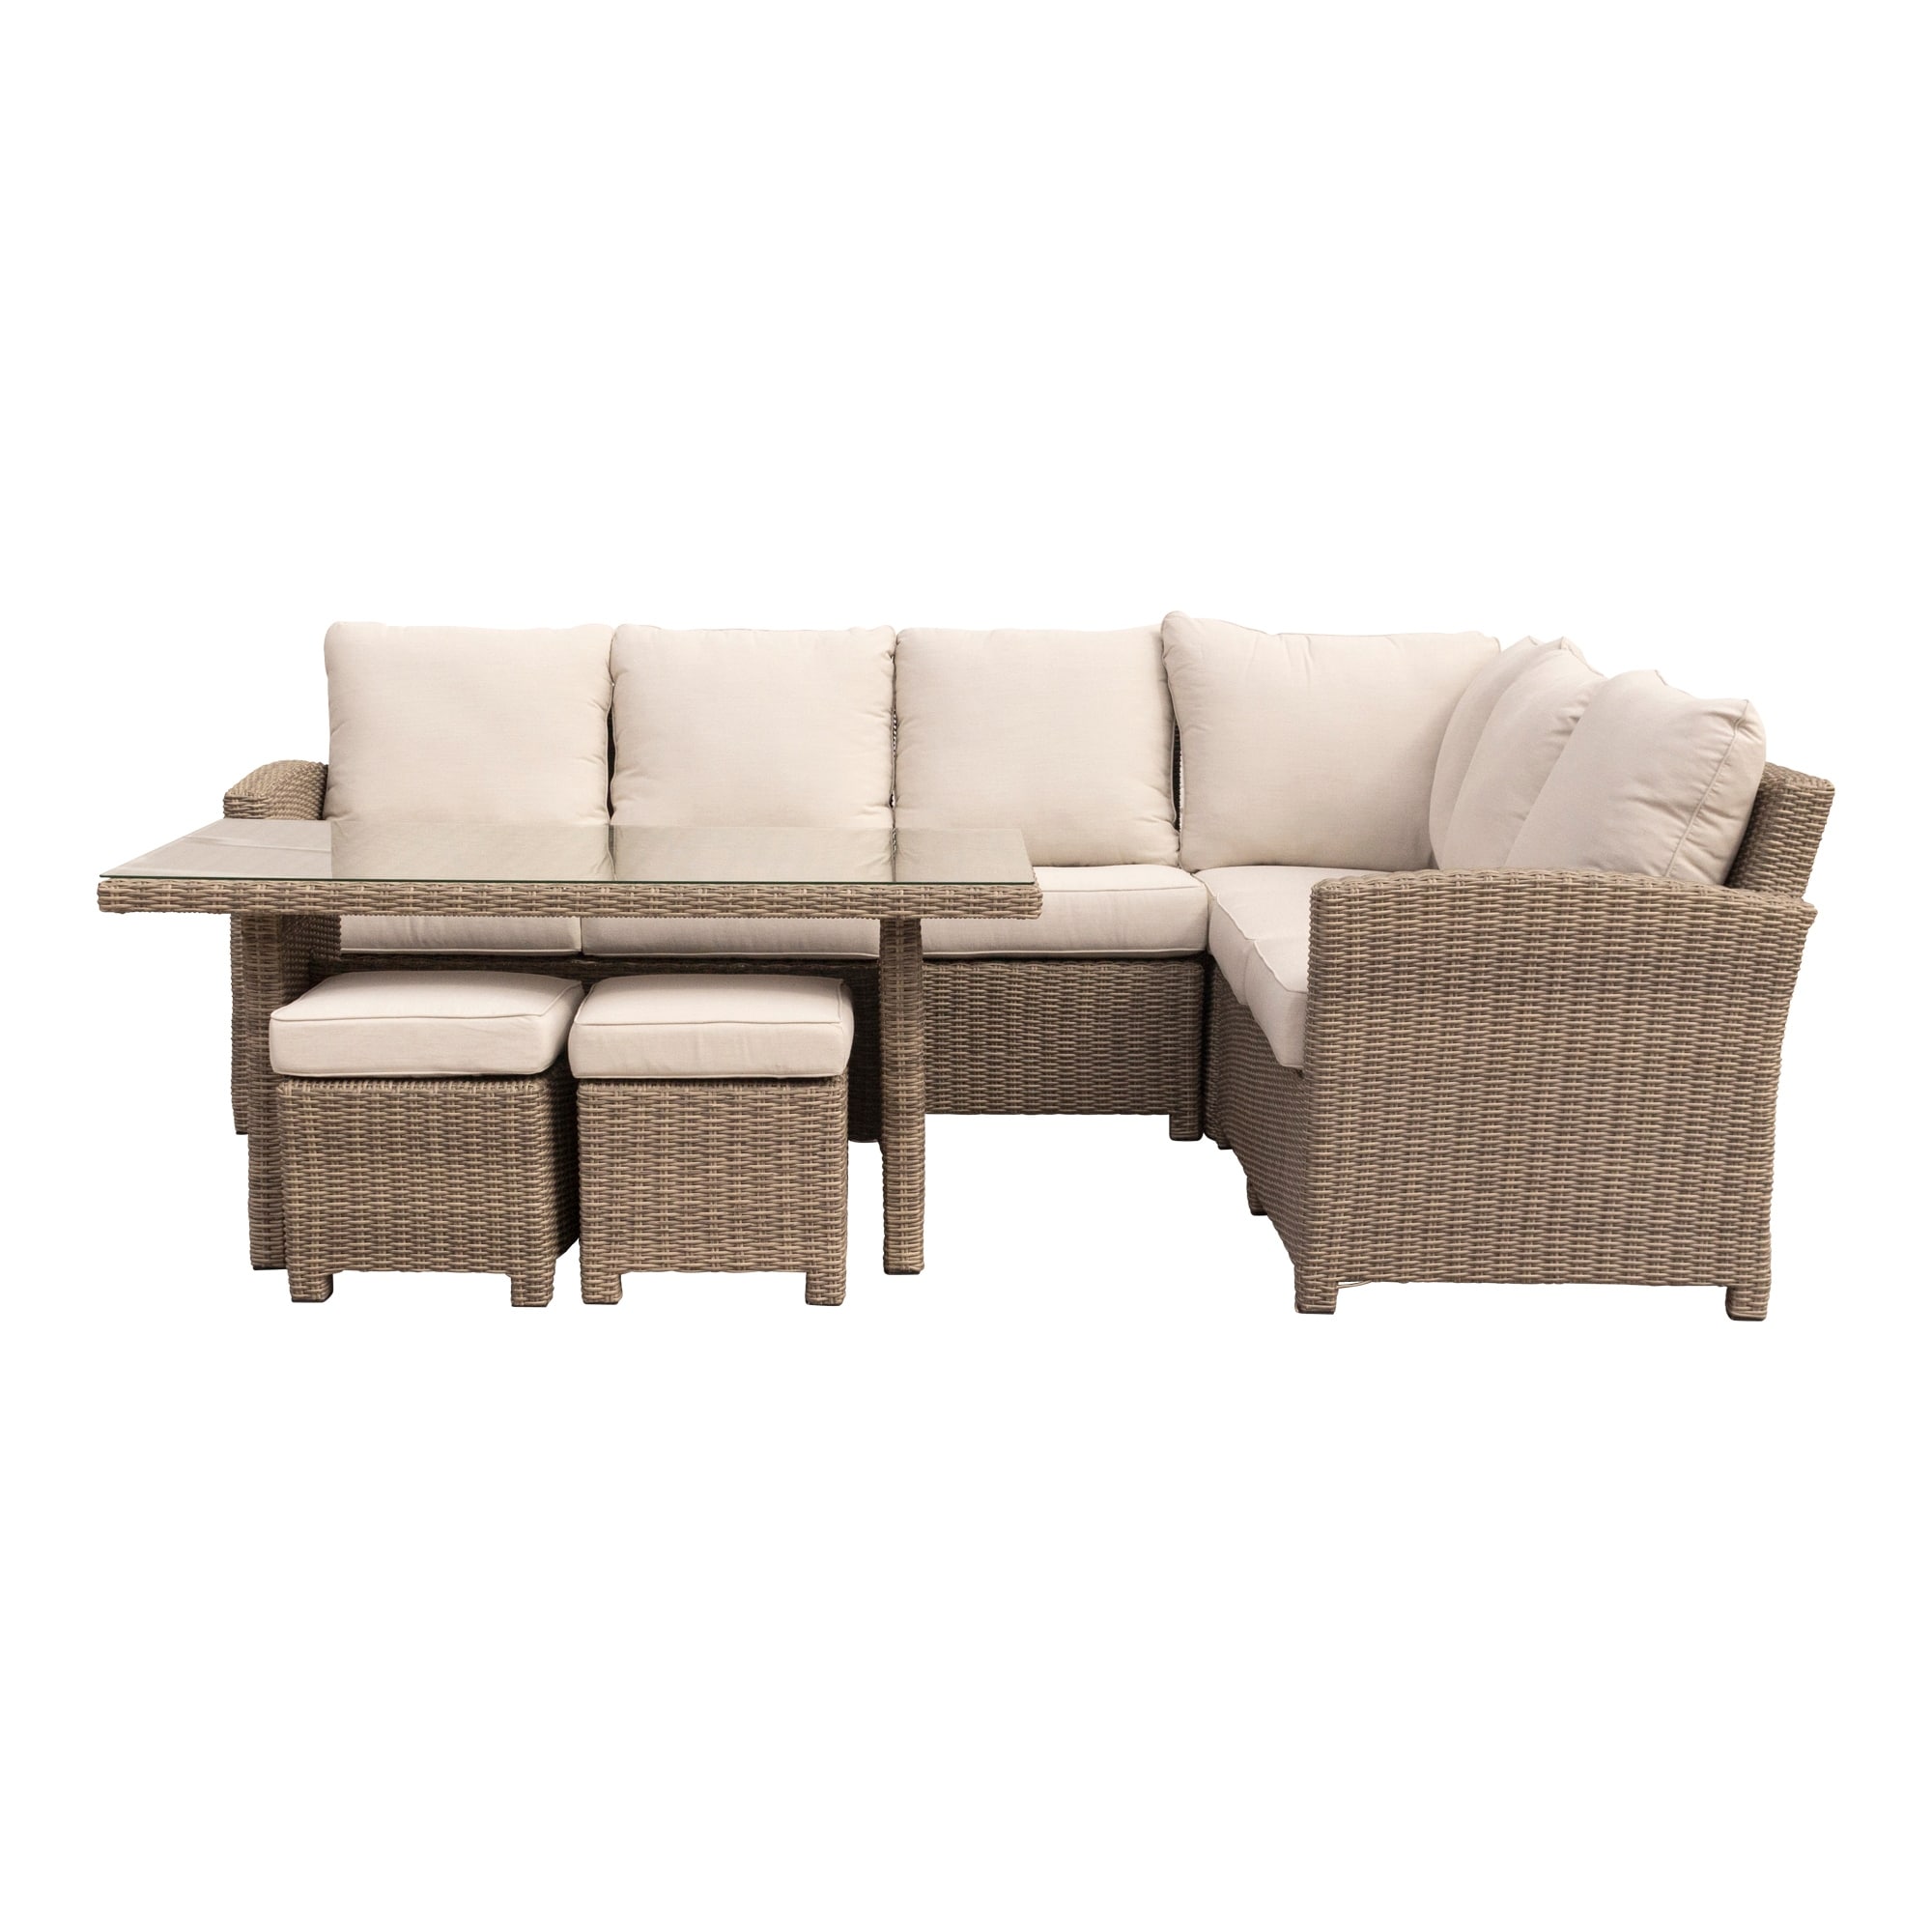 Courtyard Casual Capri 7 Pc Sectional With Chow Dining And Middle Extension Chair